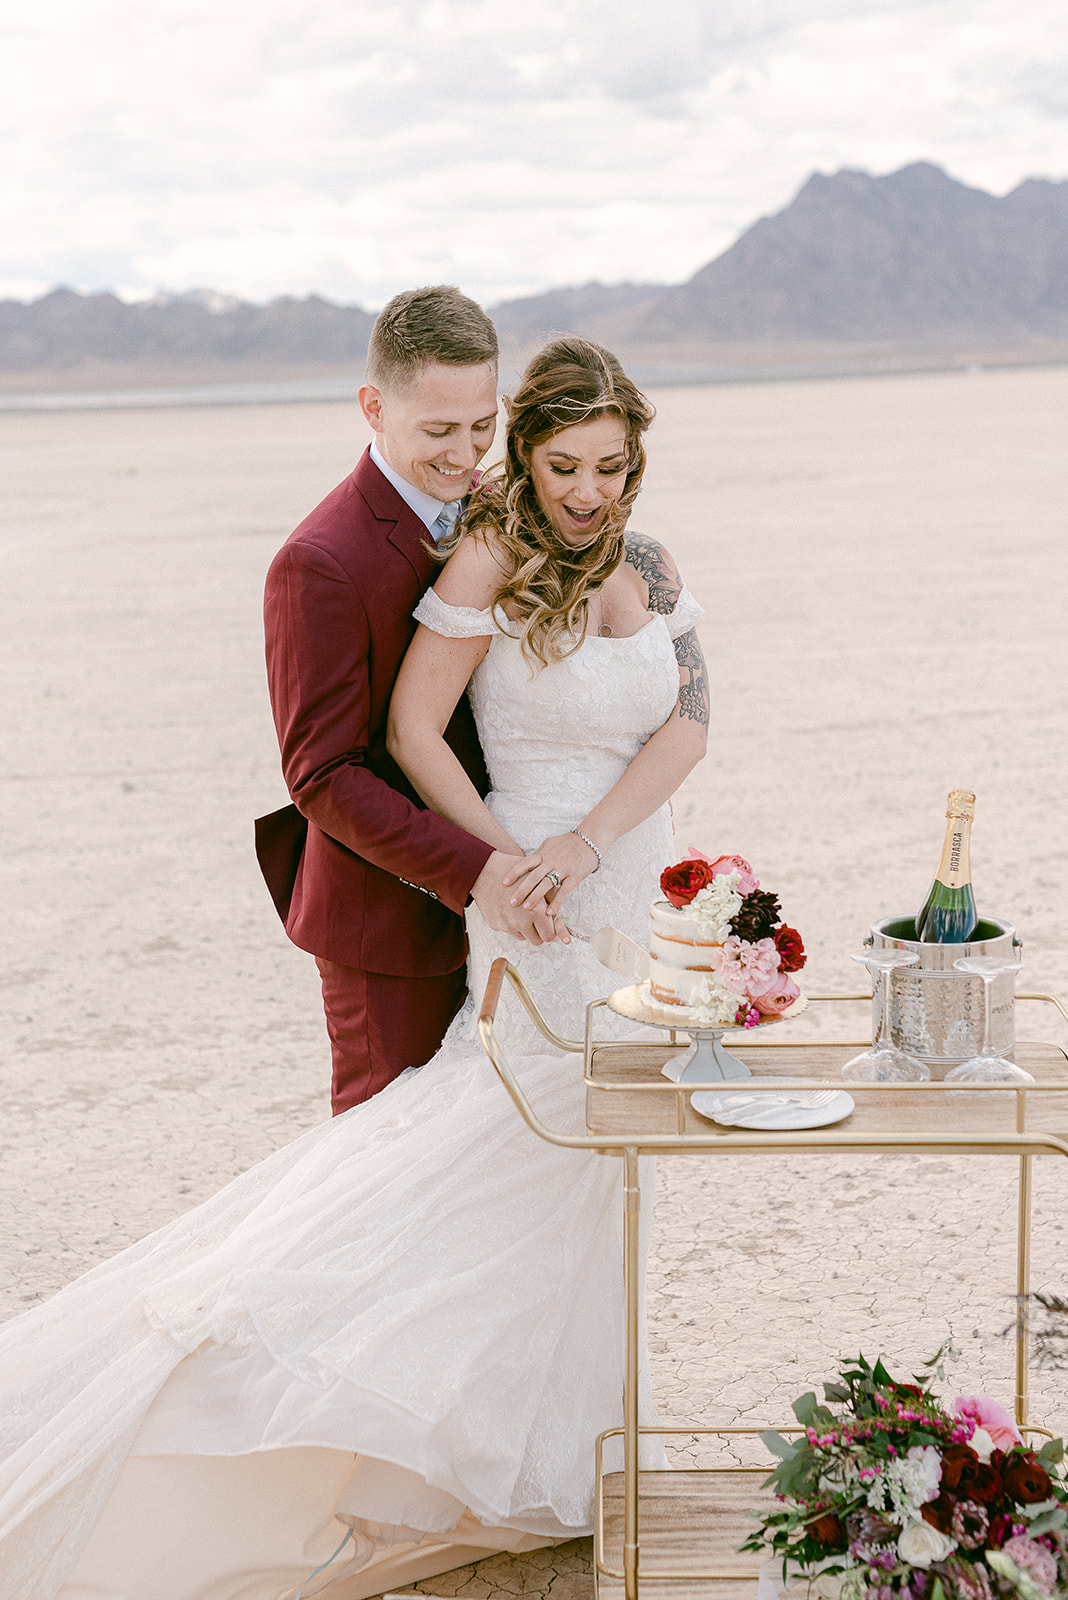 Bride and groom smiling as they cut a slice of their wedding cake during their Dry Lake Bed wedding reception